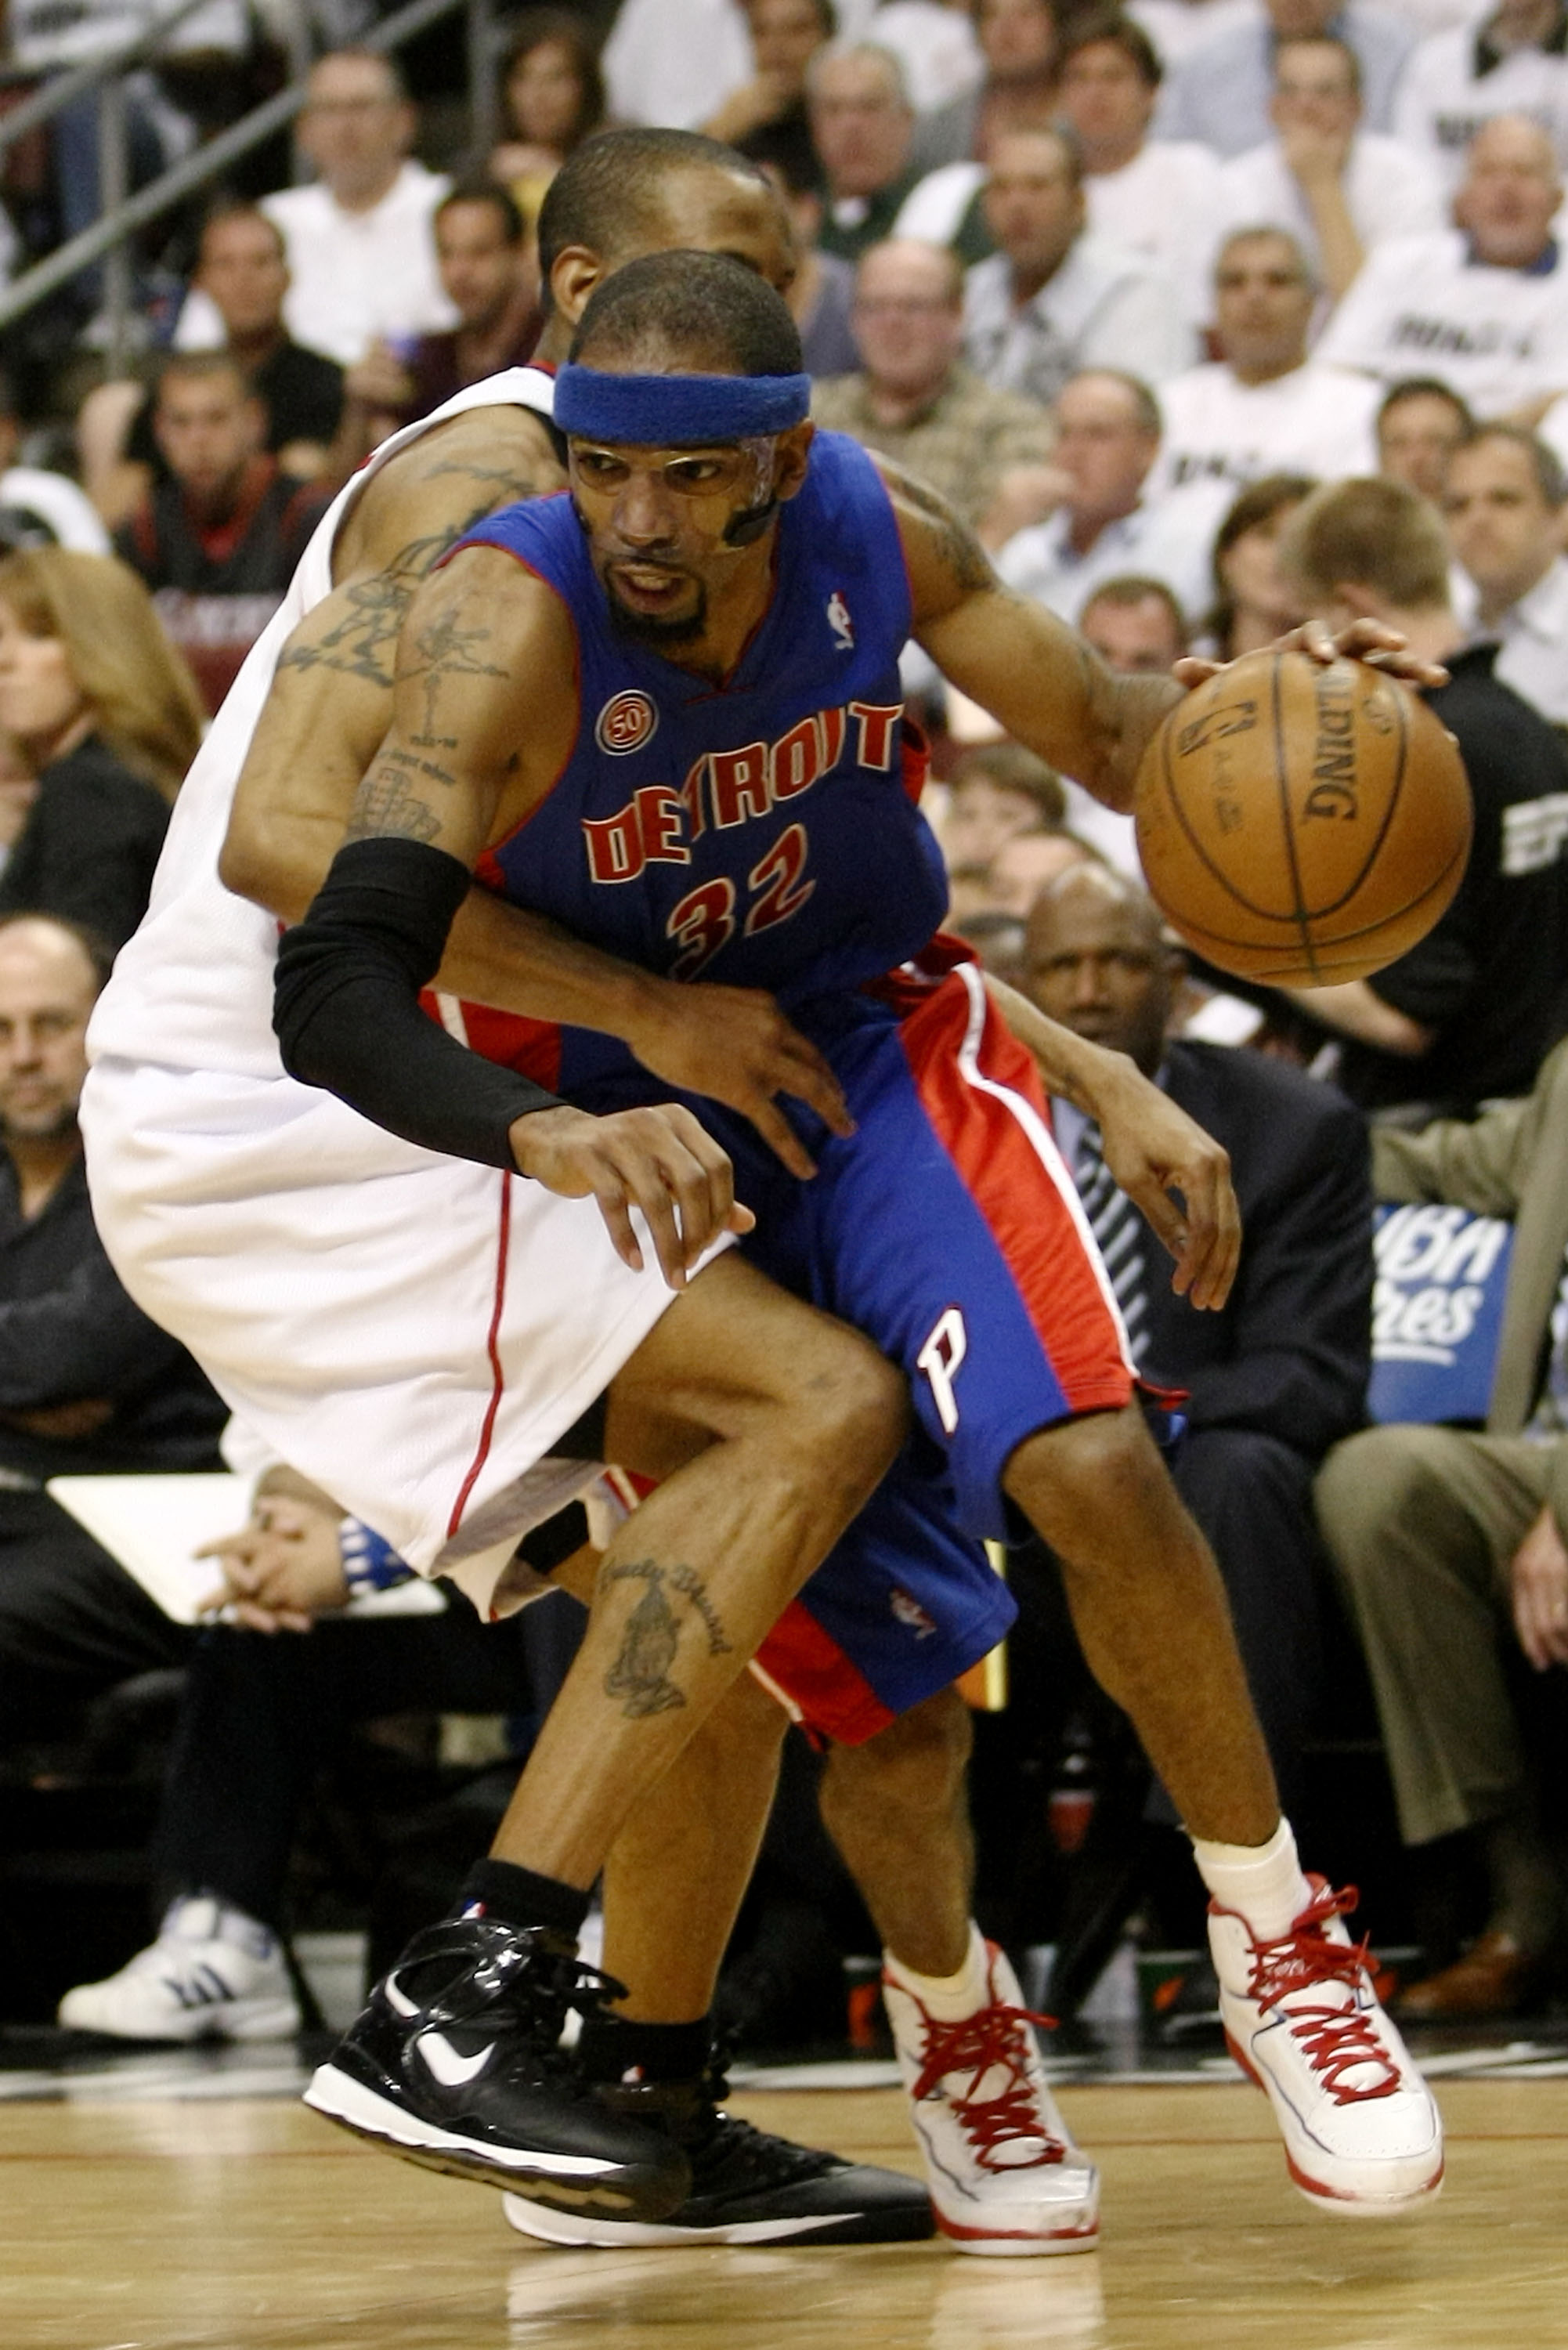 PHILADELPHIA - APRIL 25:  Richard Hamilton #32 of the Detroit Pistons drives past Andre Iguodala #9 of the Philadelphia 76ers in Game Three of the Eastern Conference Quarterfinals during the 2008 NBA Playoffs on April 25, 2008 at the Wachovia Center in Ph